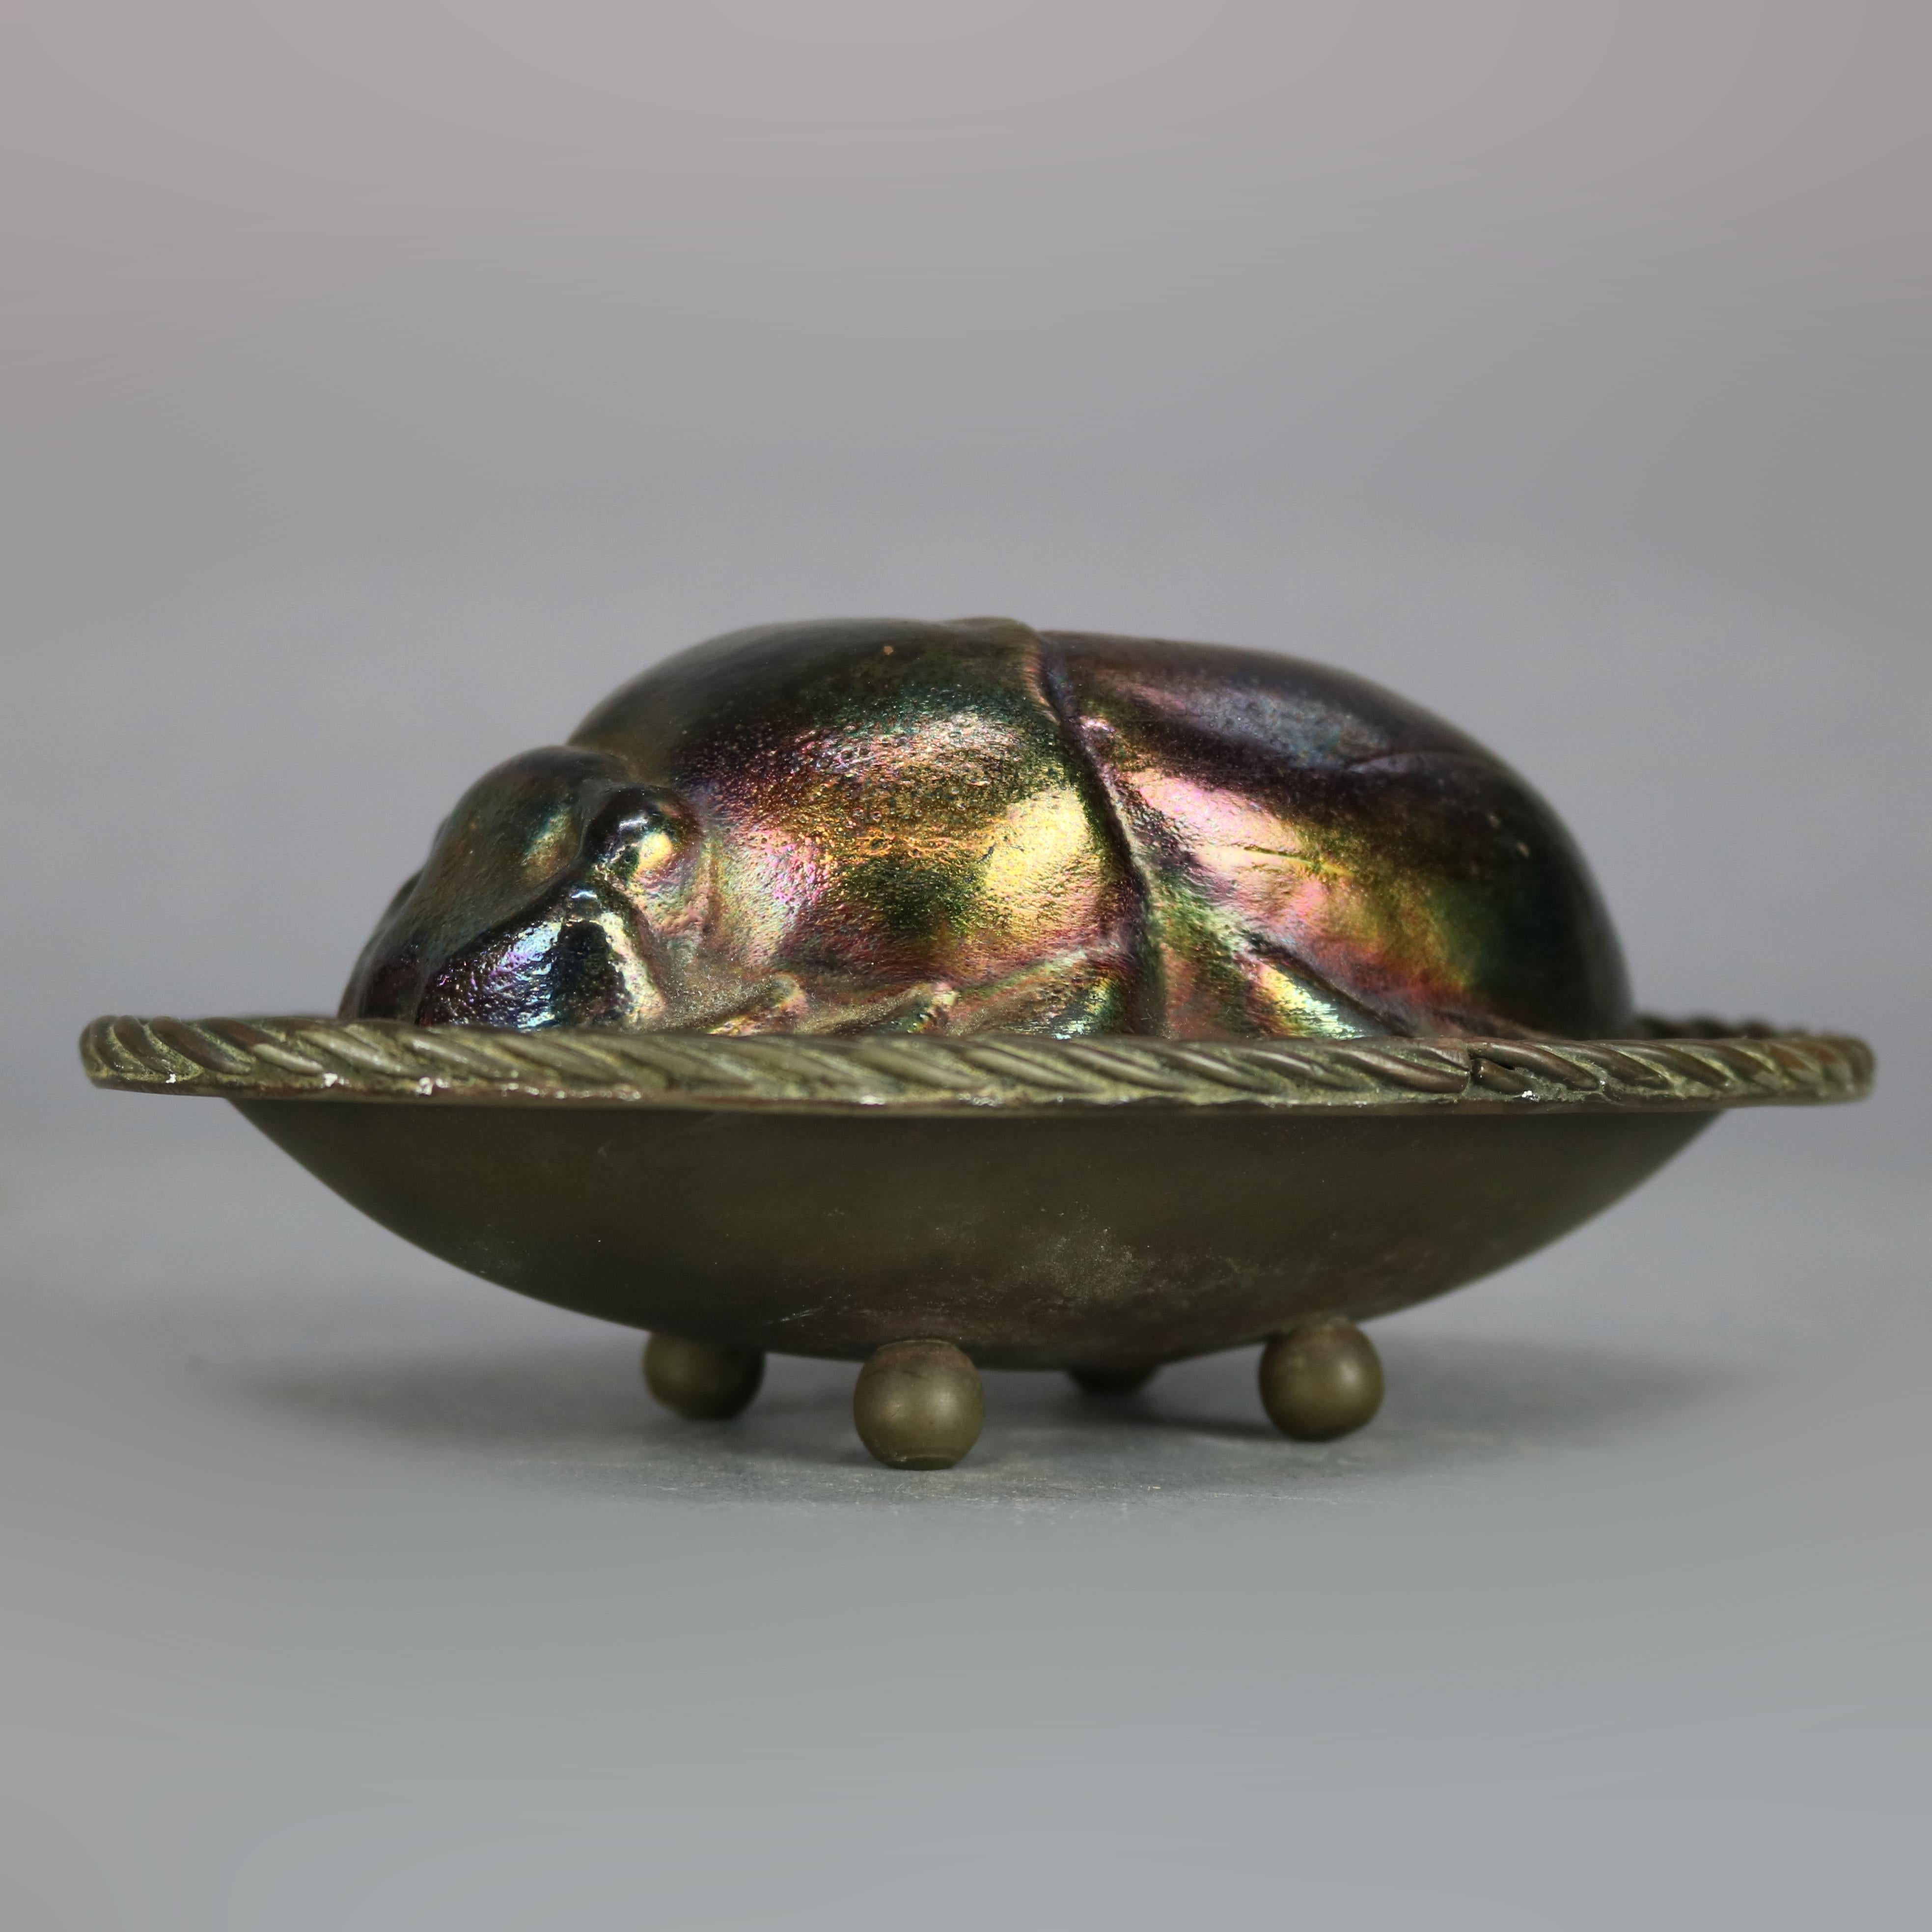 An antique figural sculpture in the manner of Tiffany Studios offers art glass in the form of a scarab (beetle) seated on cast bronze tray having gadroon edge and seated on ball feet, later added stamp on base 